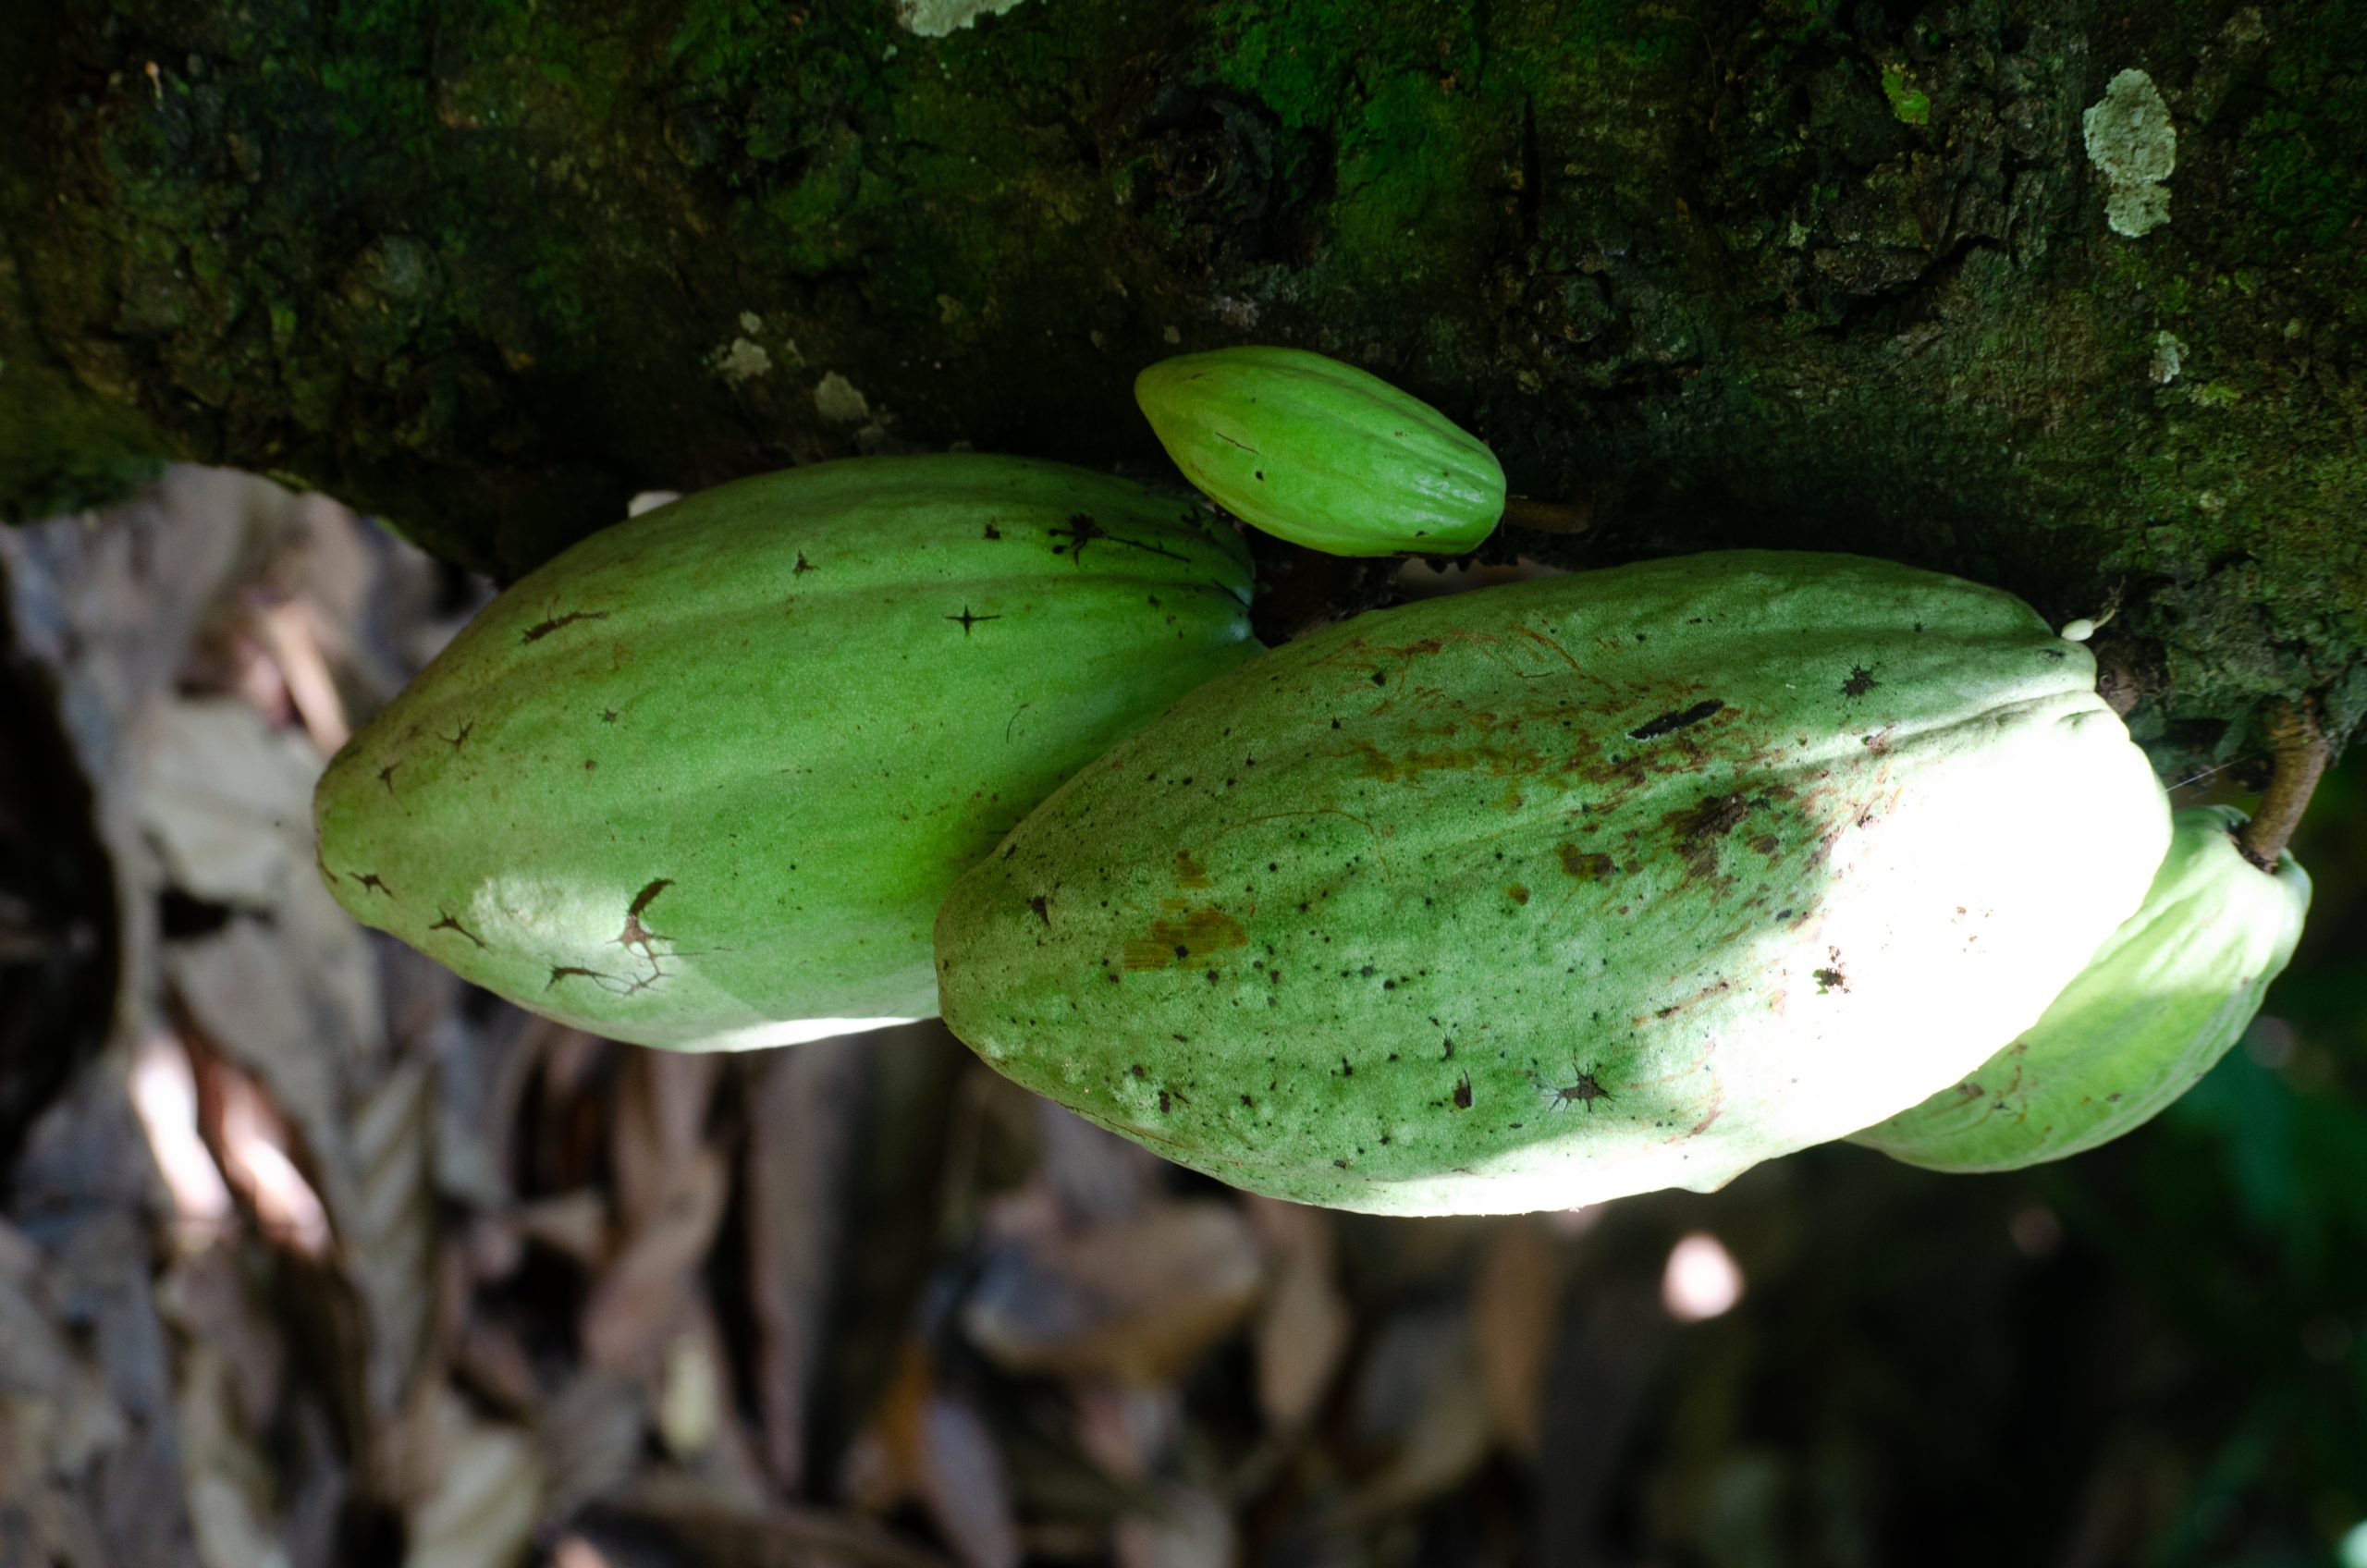 Cacao Trees